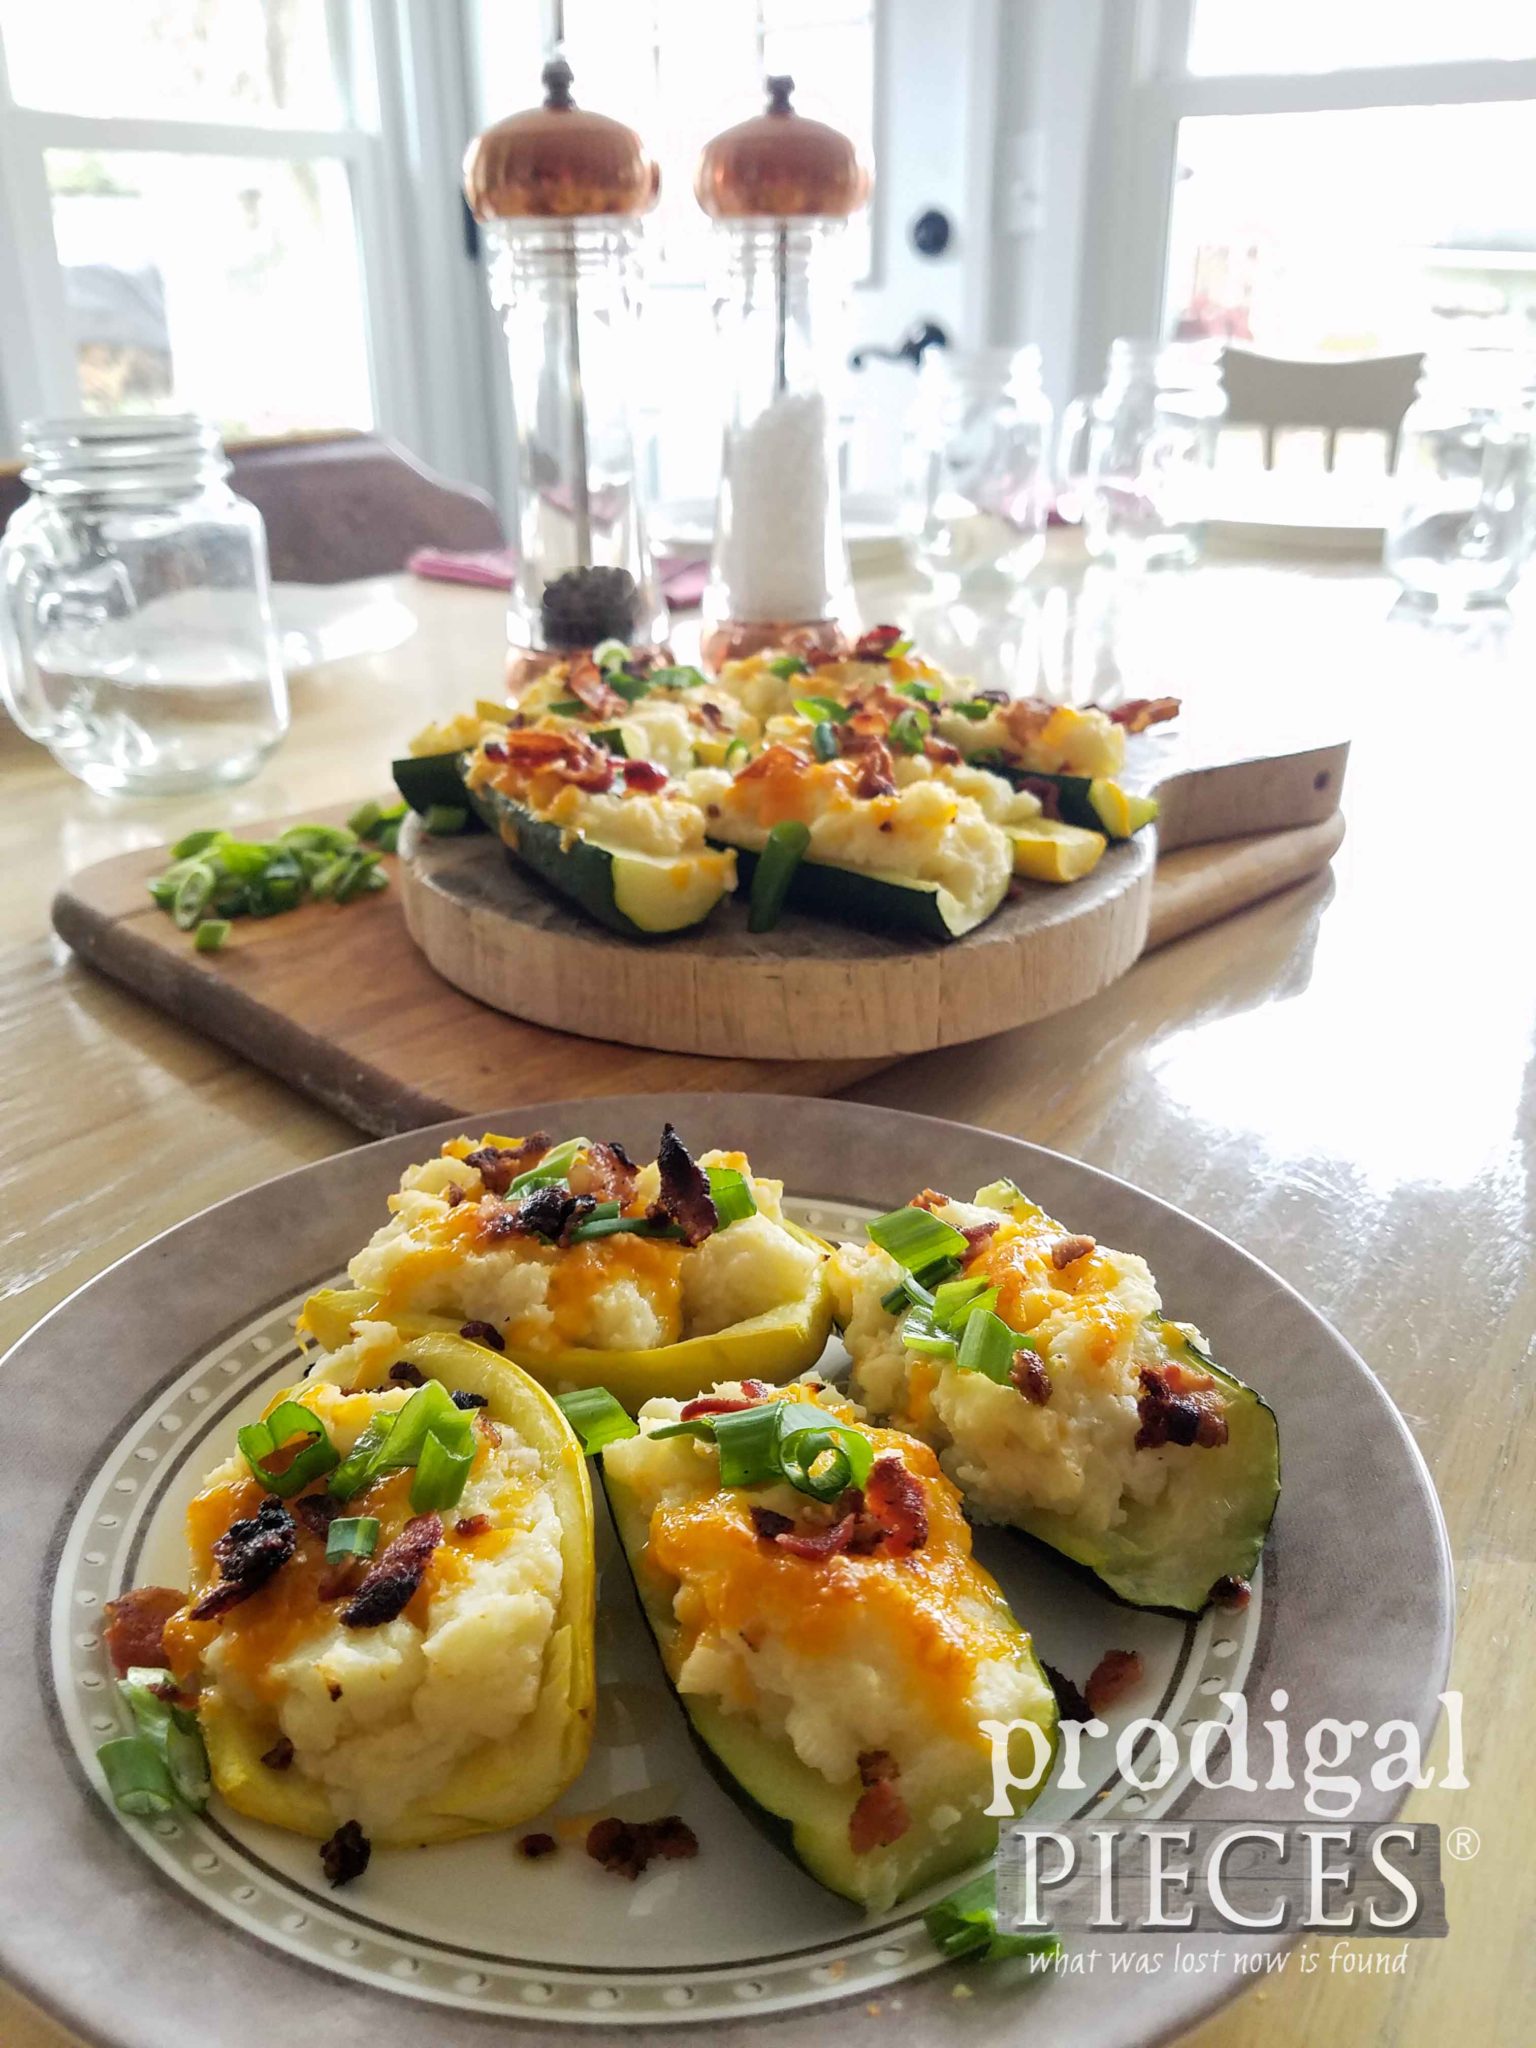 The Potatoless Twice Baked Potato for your next holiday meal by Larissa of Prodigal Pieces | prodigalpieces.com